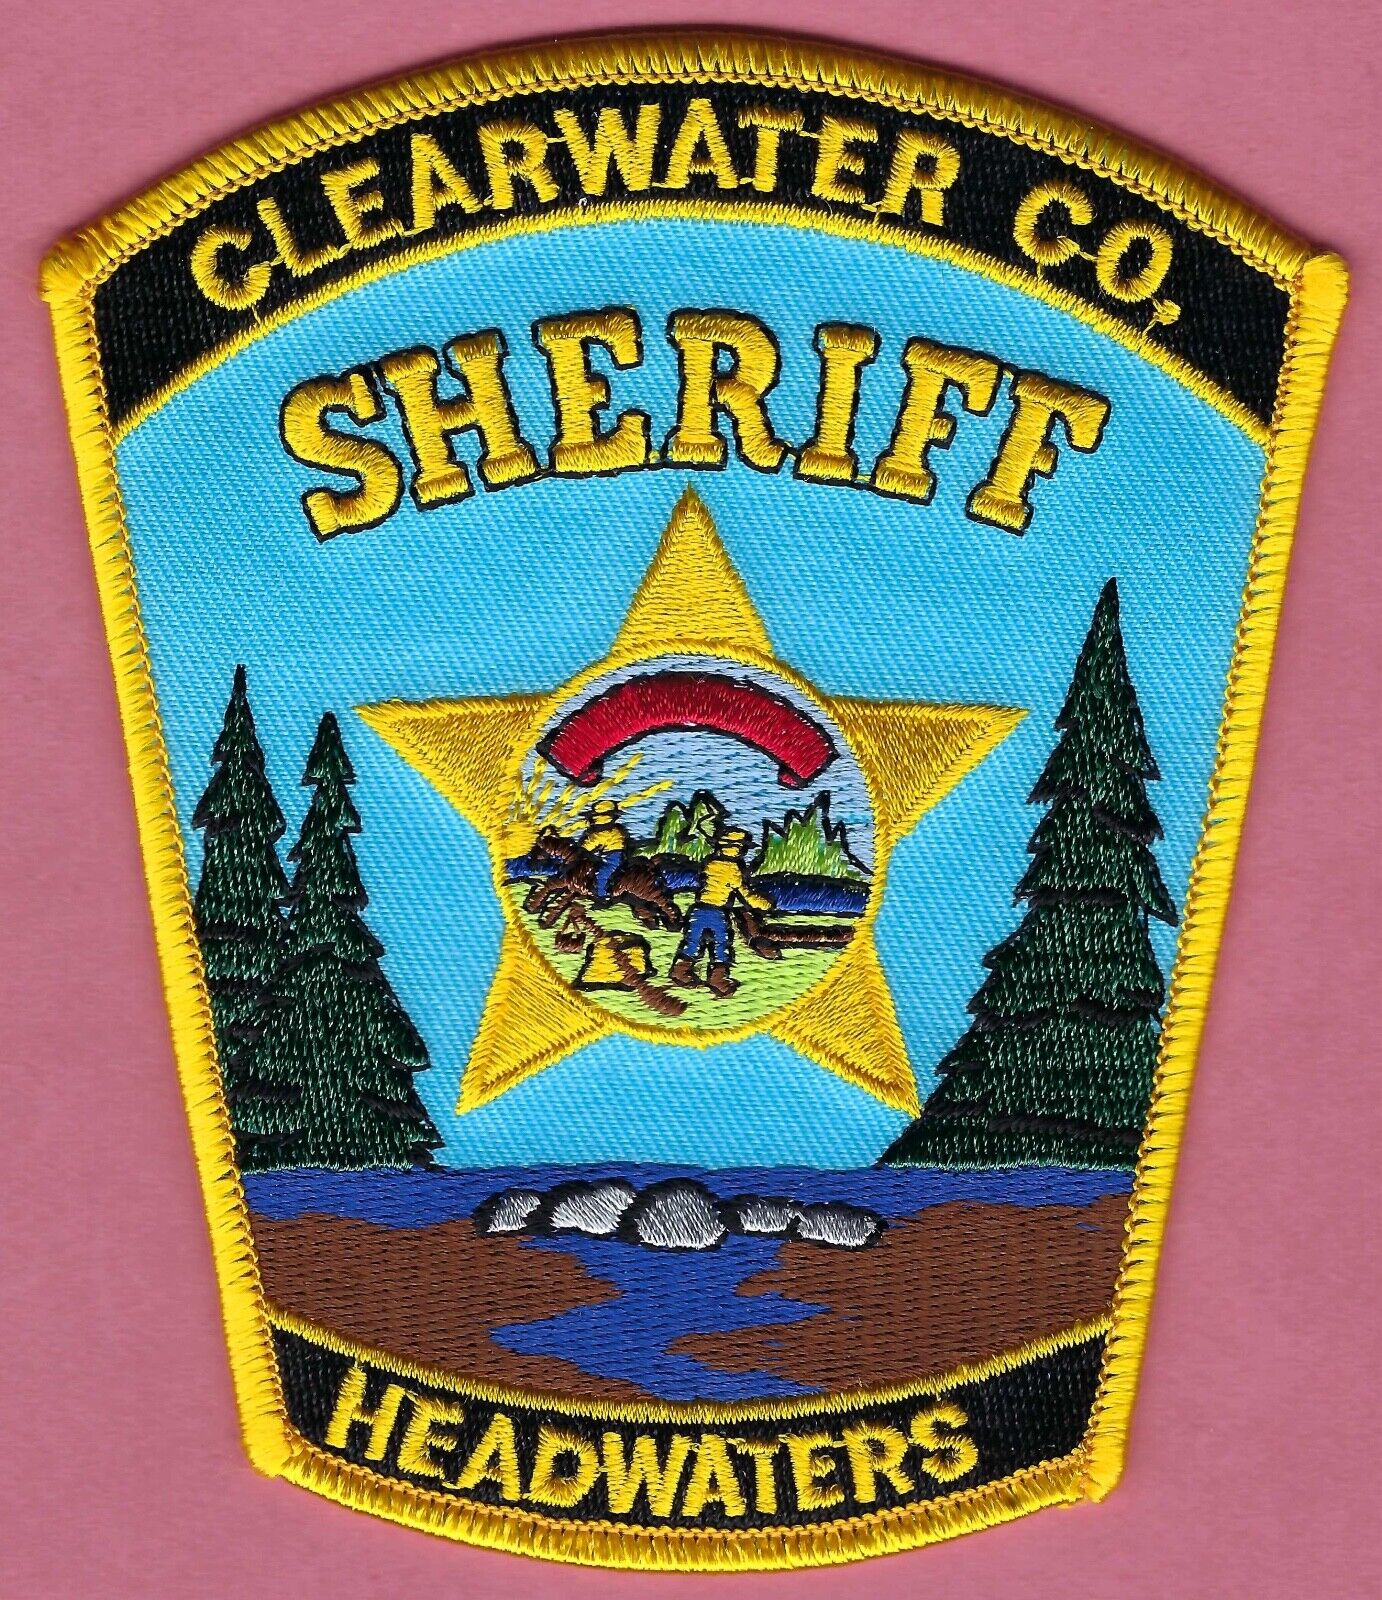 CLEARWATER COUNTY MINNESOTA SHERIFF SHOULDER PATCH